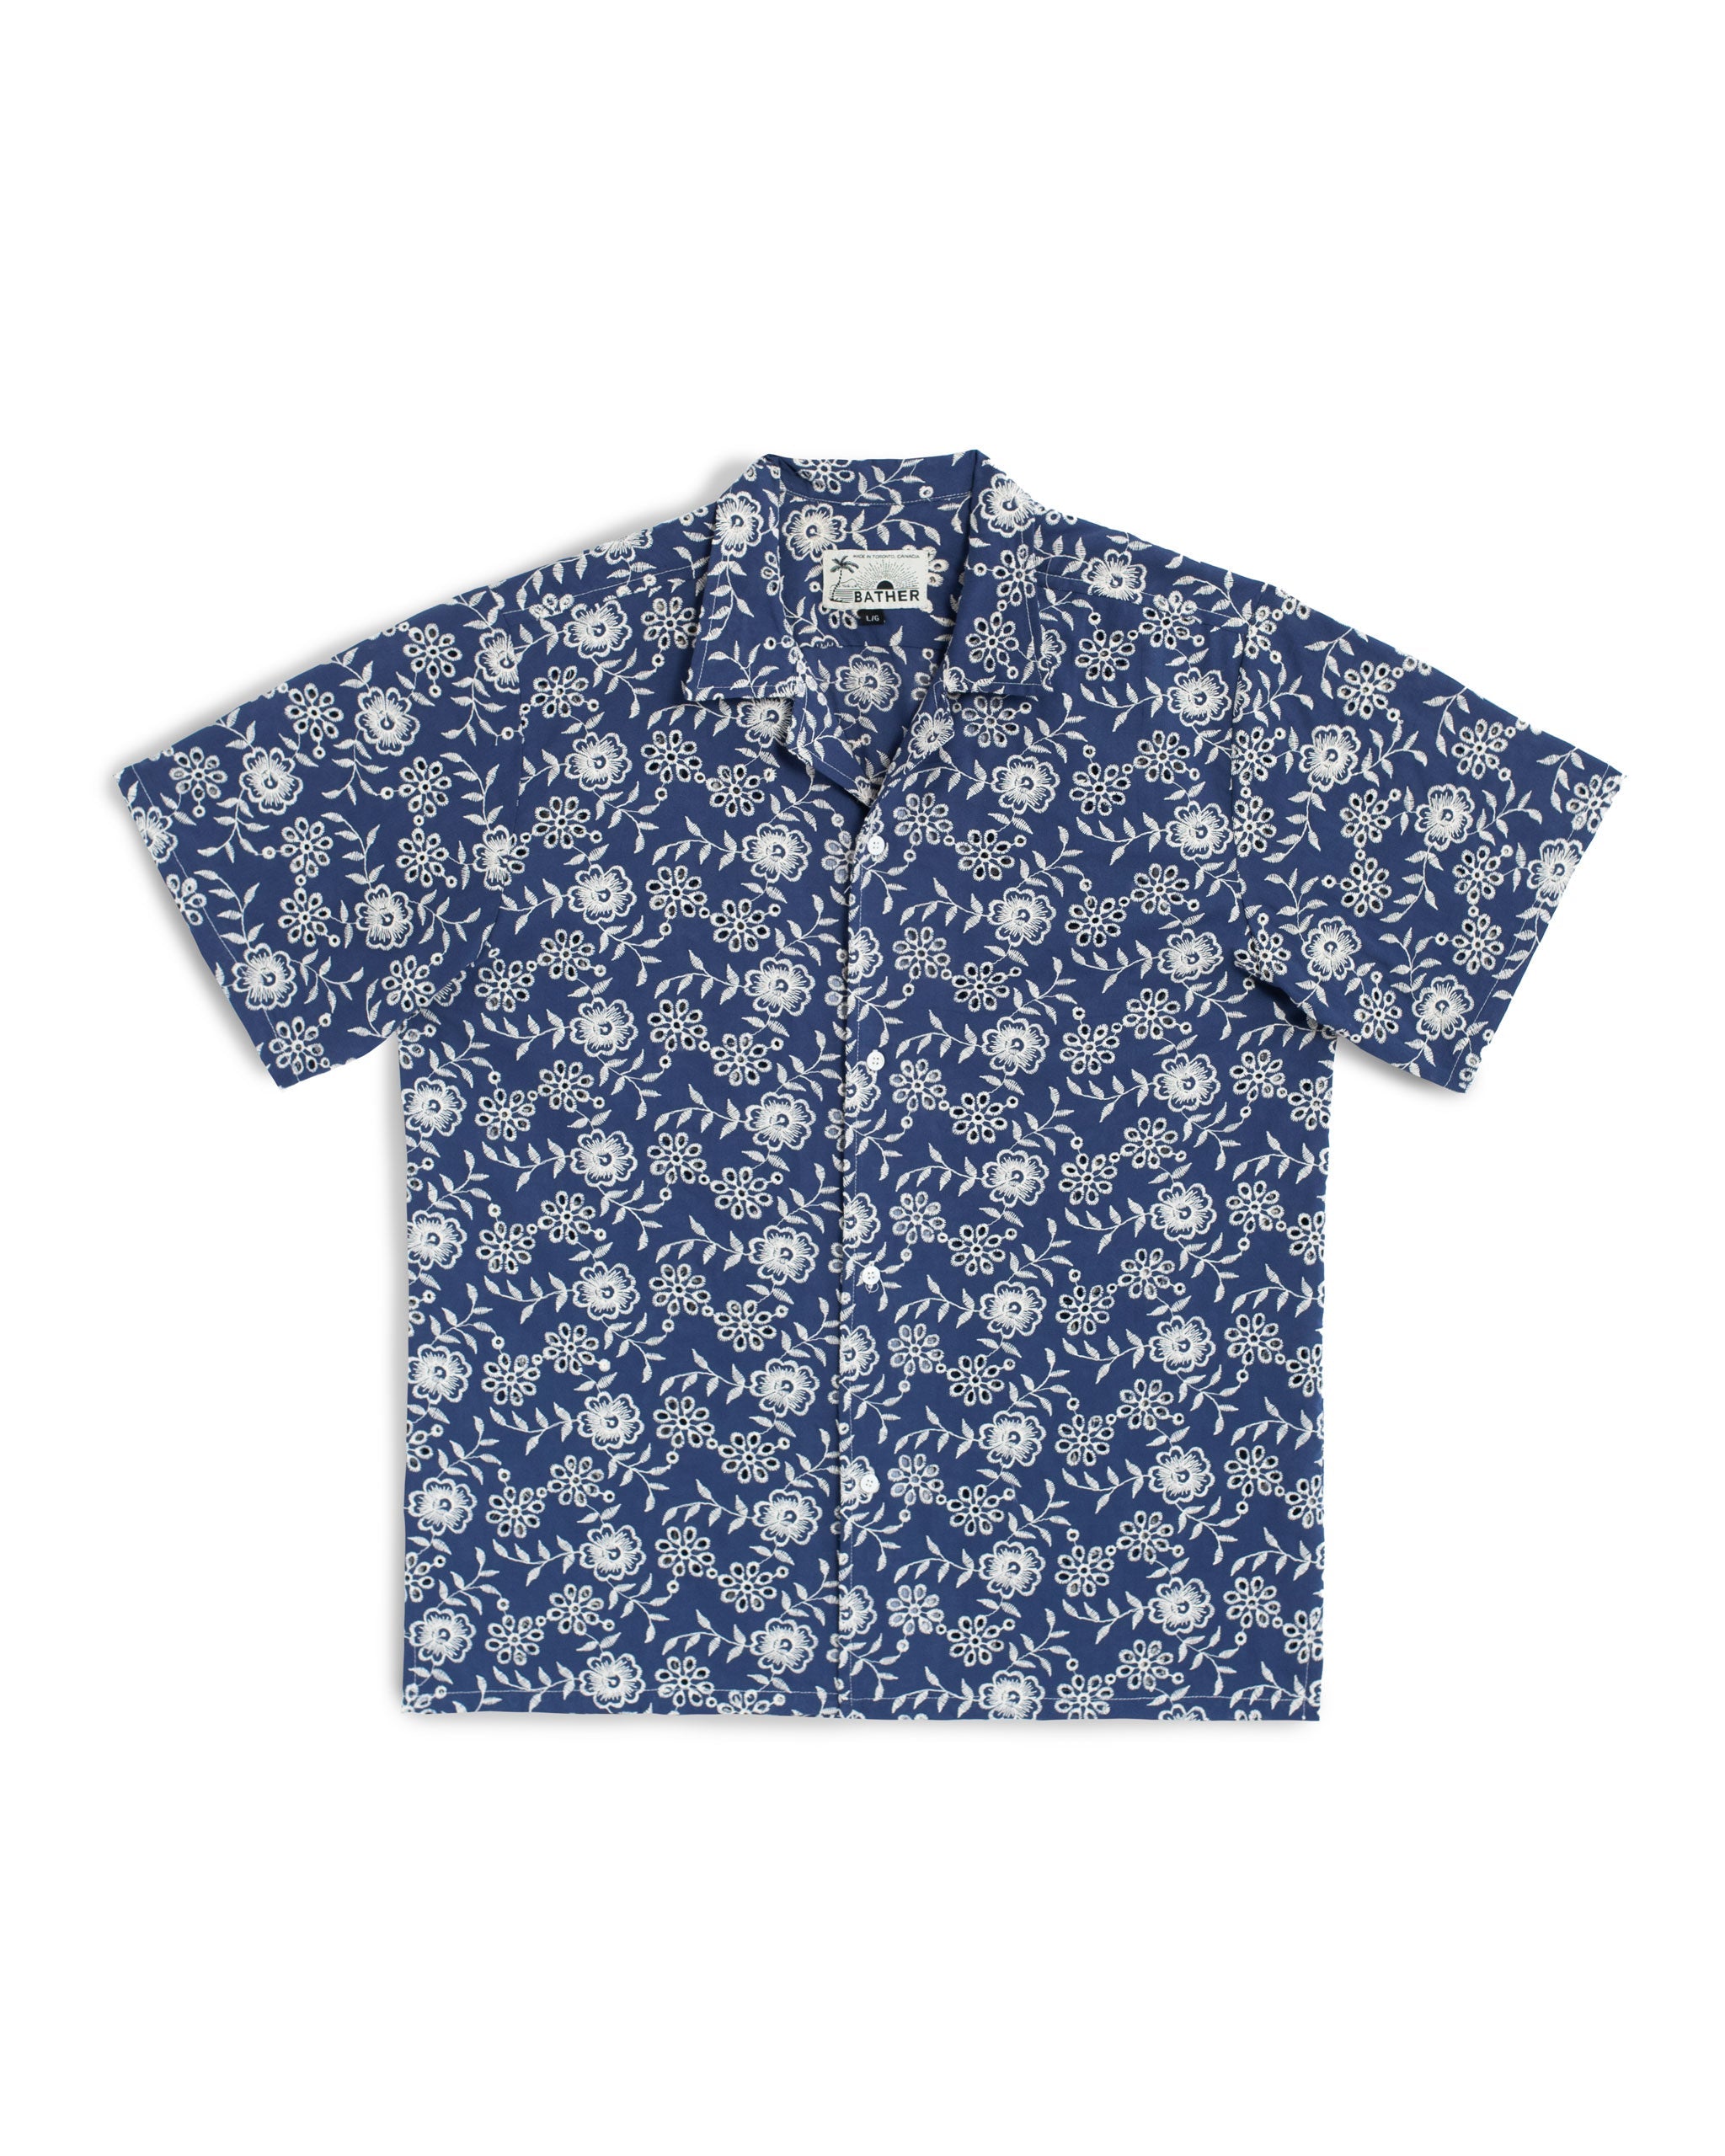 Blue camp shirt with an embroidered floral pattern